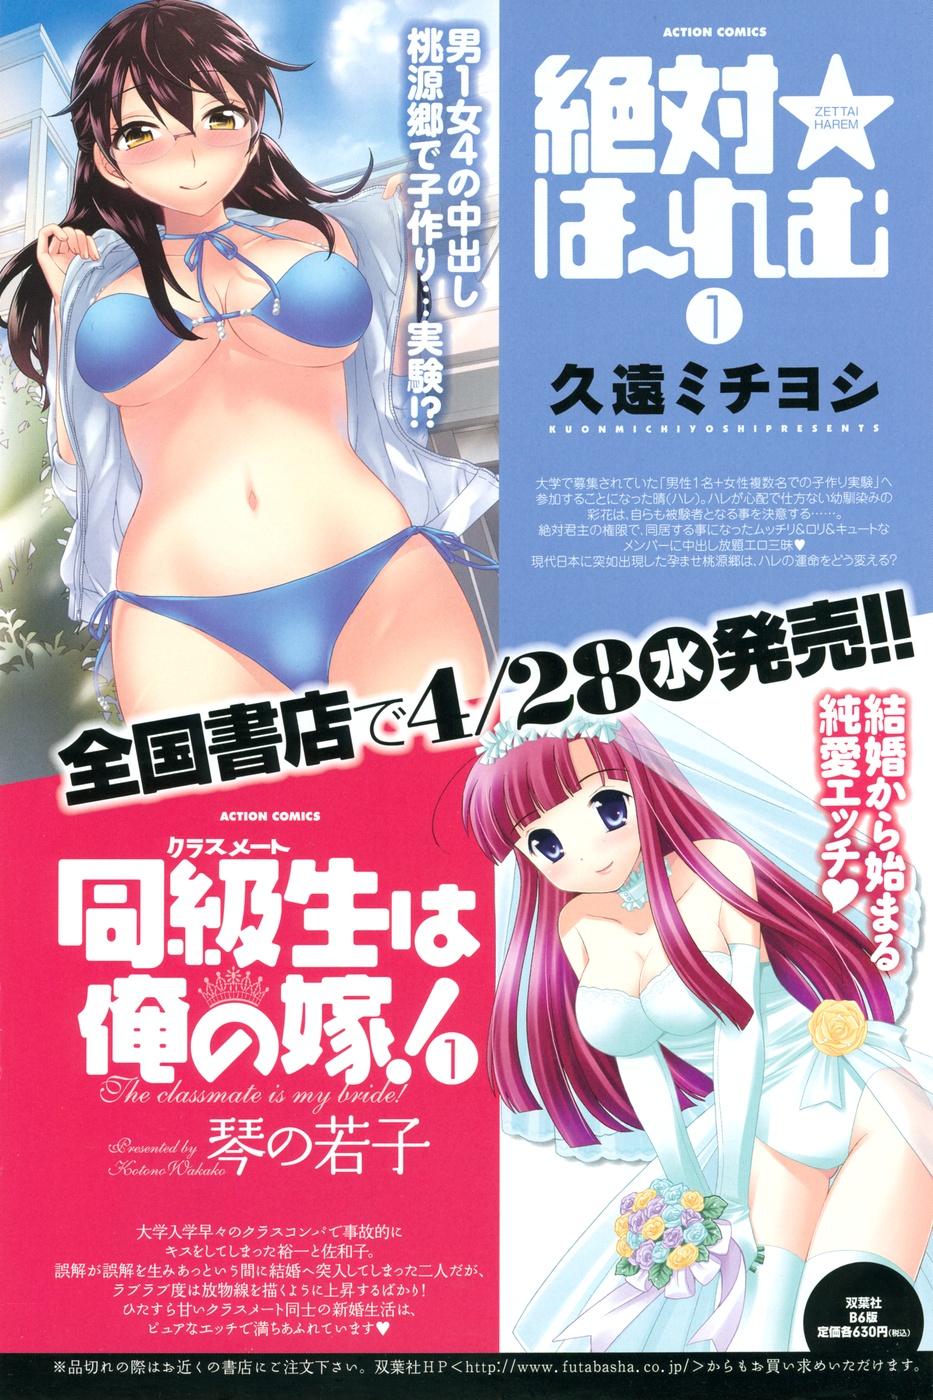 Men's Young Special Ikazuchi 2010-06 Vol. 14 136